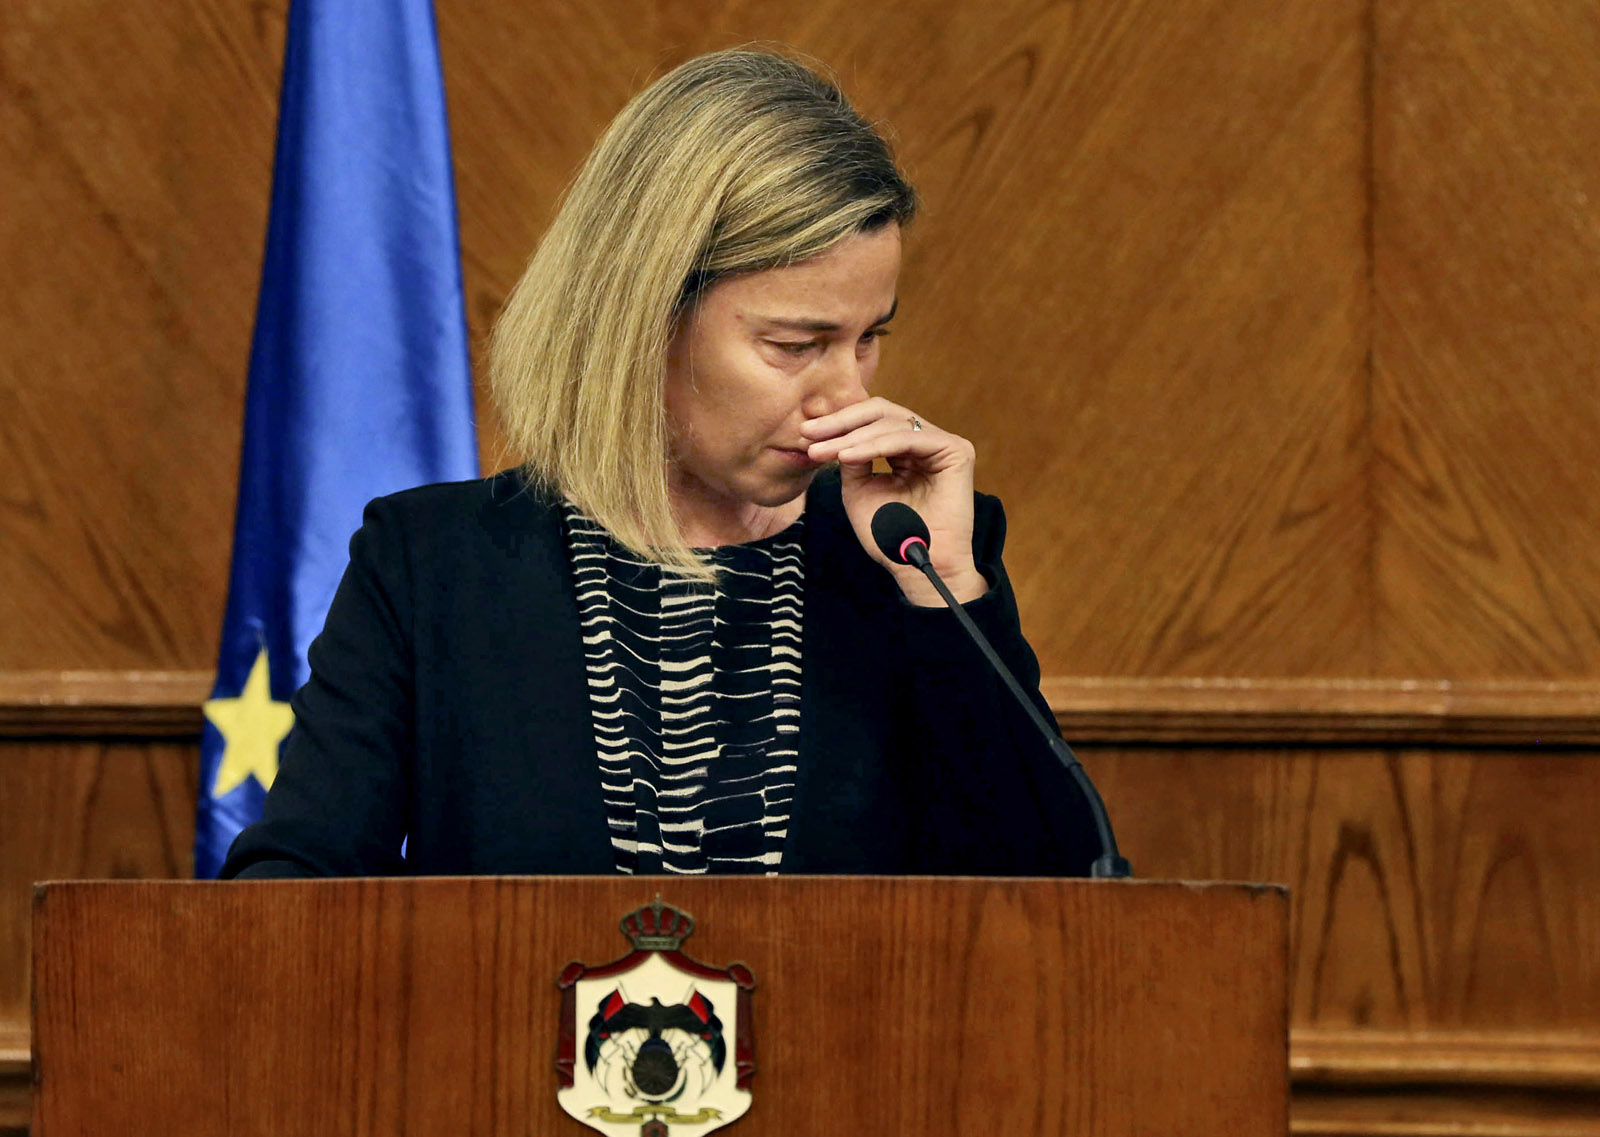 European Union Foreign Policy Chief Federica Mogherini, reacts to the latest news on the Brussels attacks, during a news conference with Jordanian Foreign Minister Nasser Judeh in Amman, Jordan, Tuesday, March 22, 2016. Mogherini, fighting back tears, has stopped short a news conference in Jordan after saying that “today is a difficult day,” in reference to the Brussels attacks. (AP Photo)